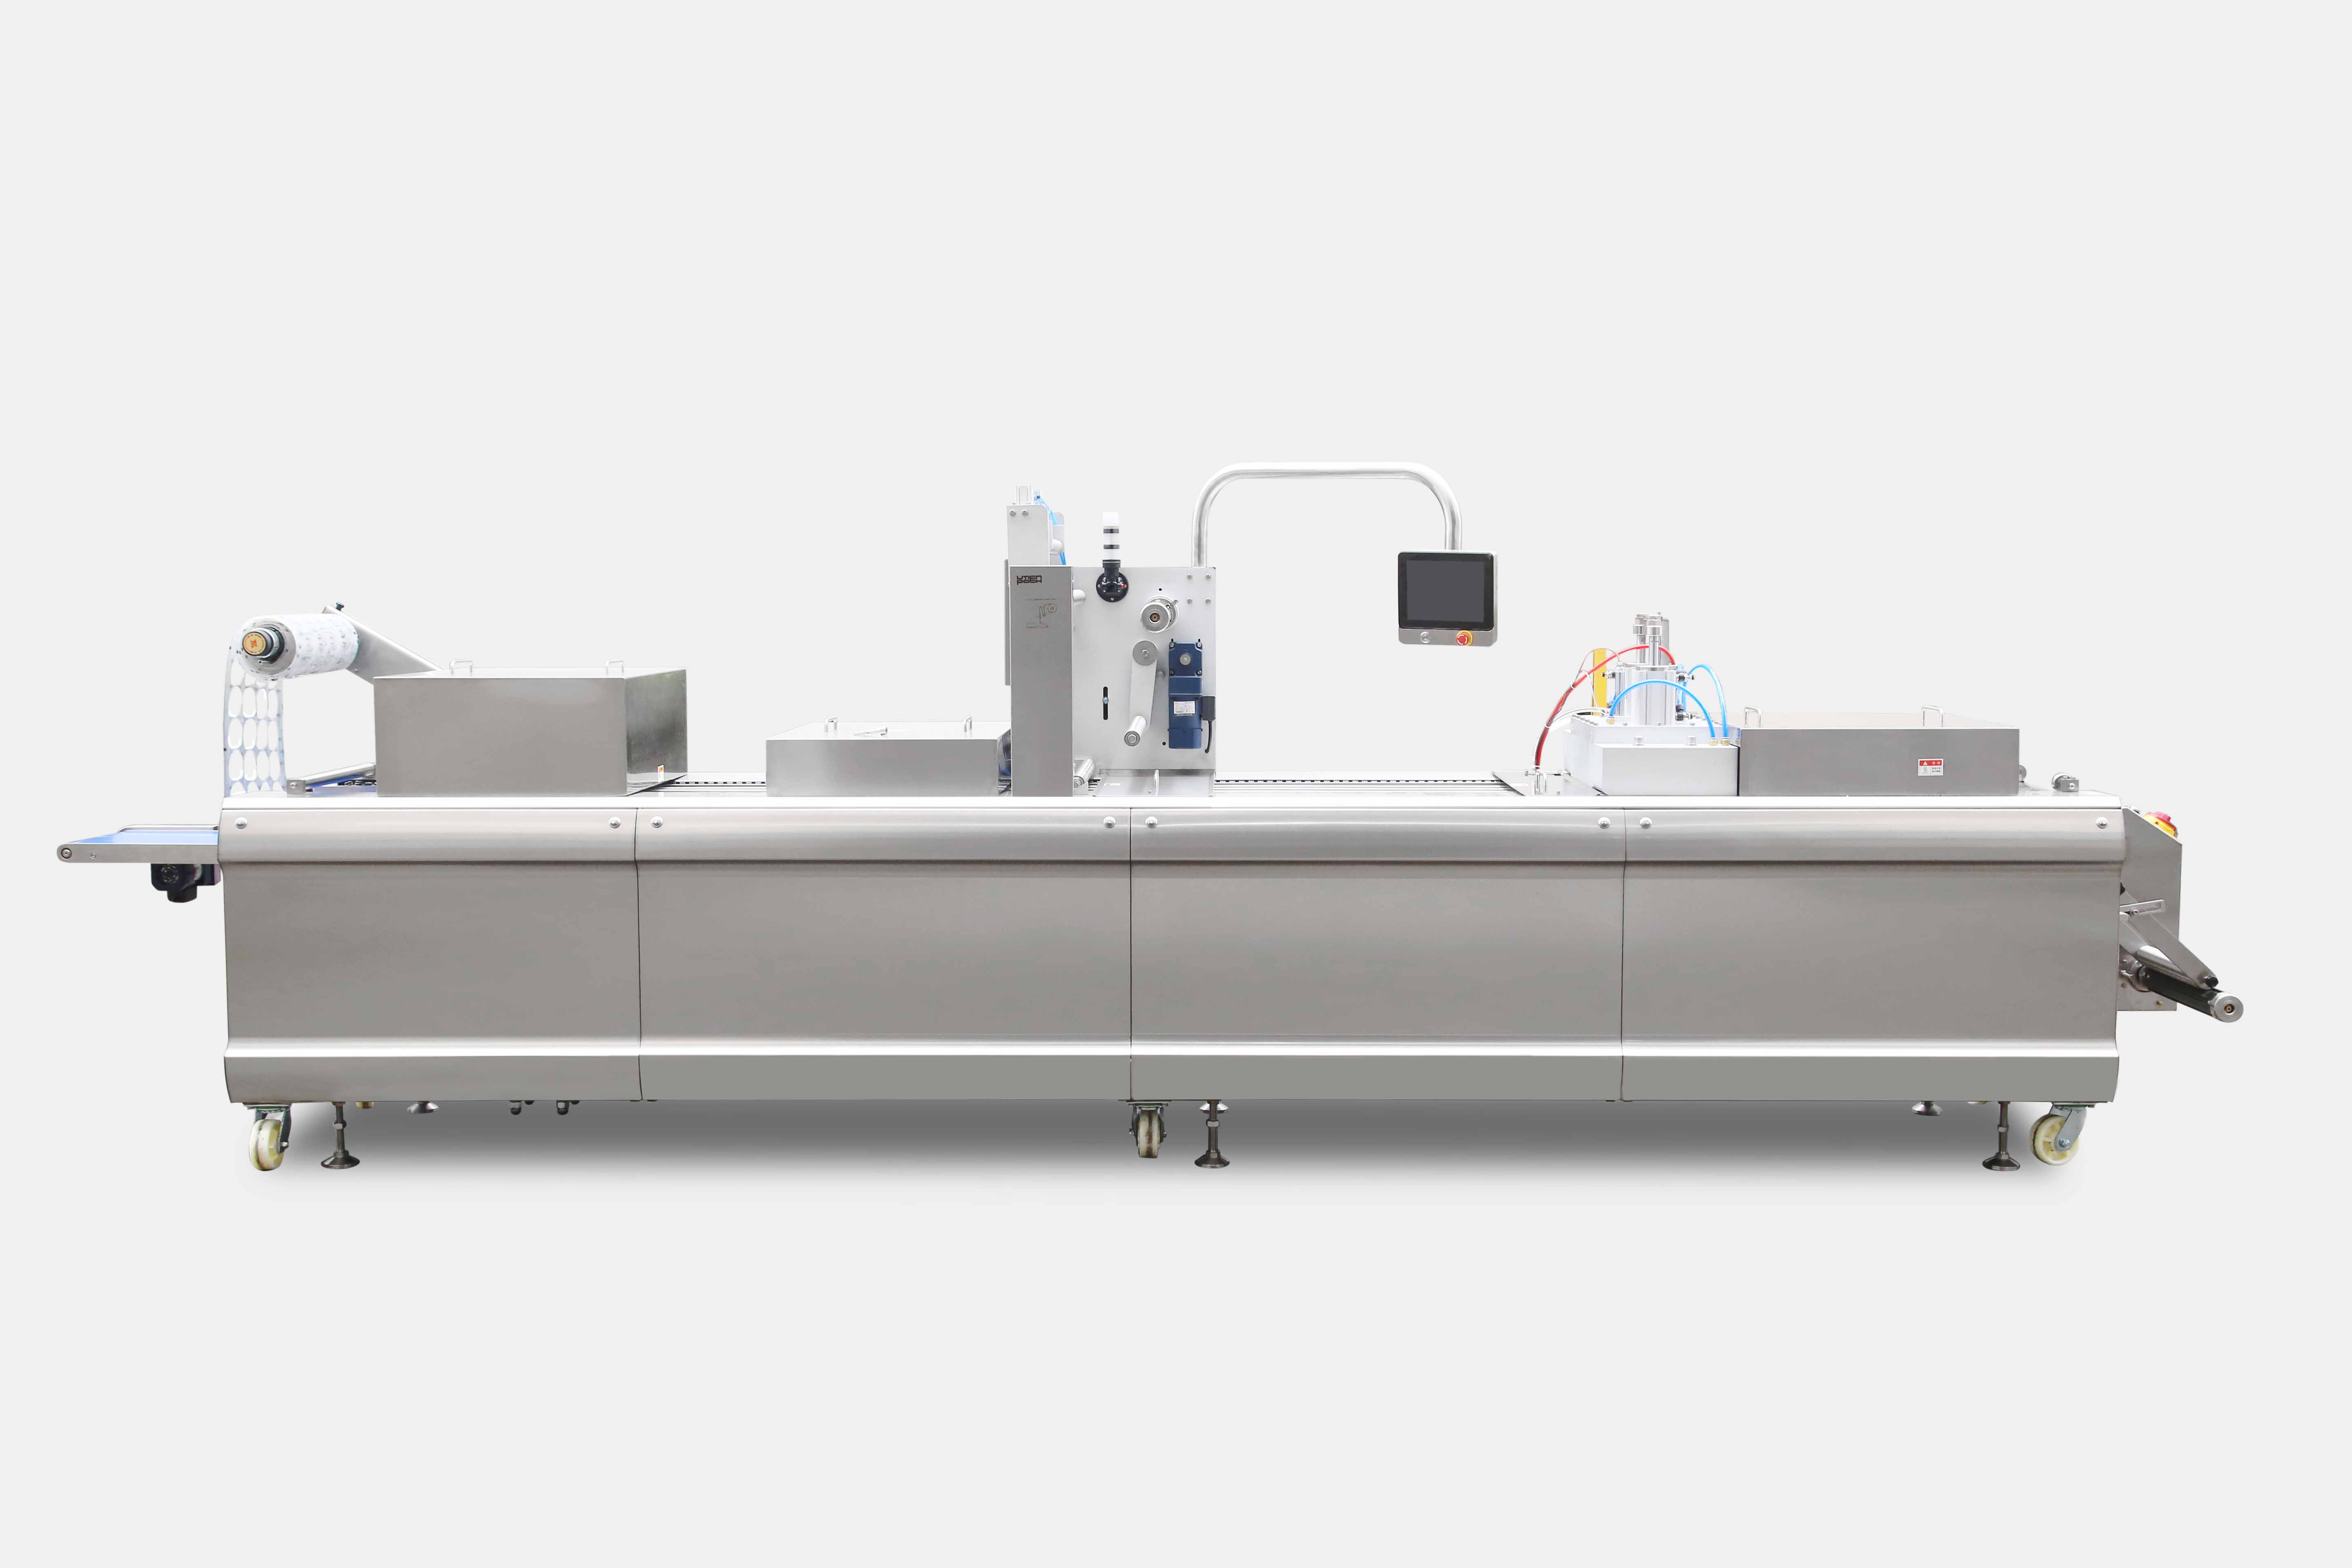 Automatic packaging production line may become a new trend in the future